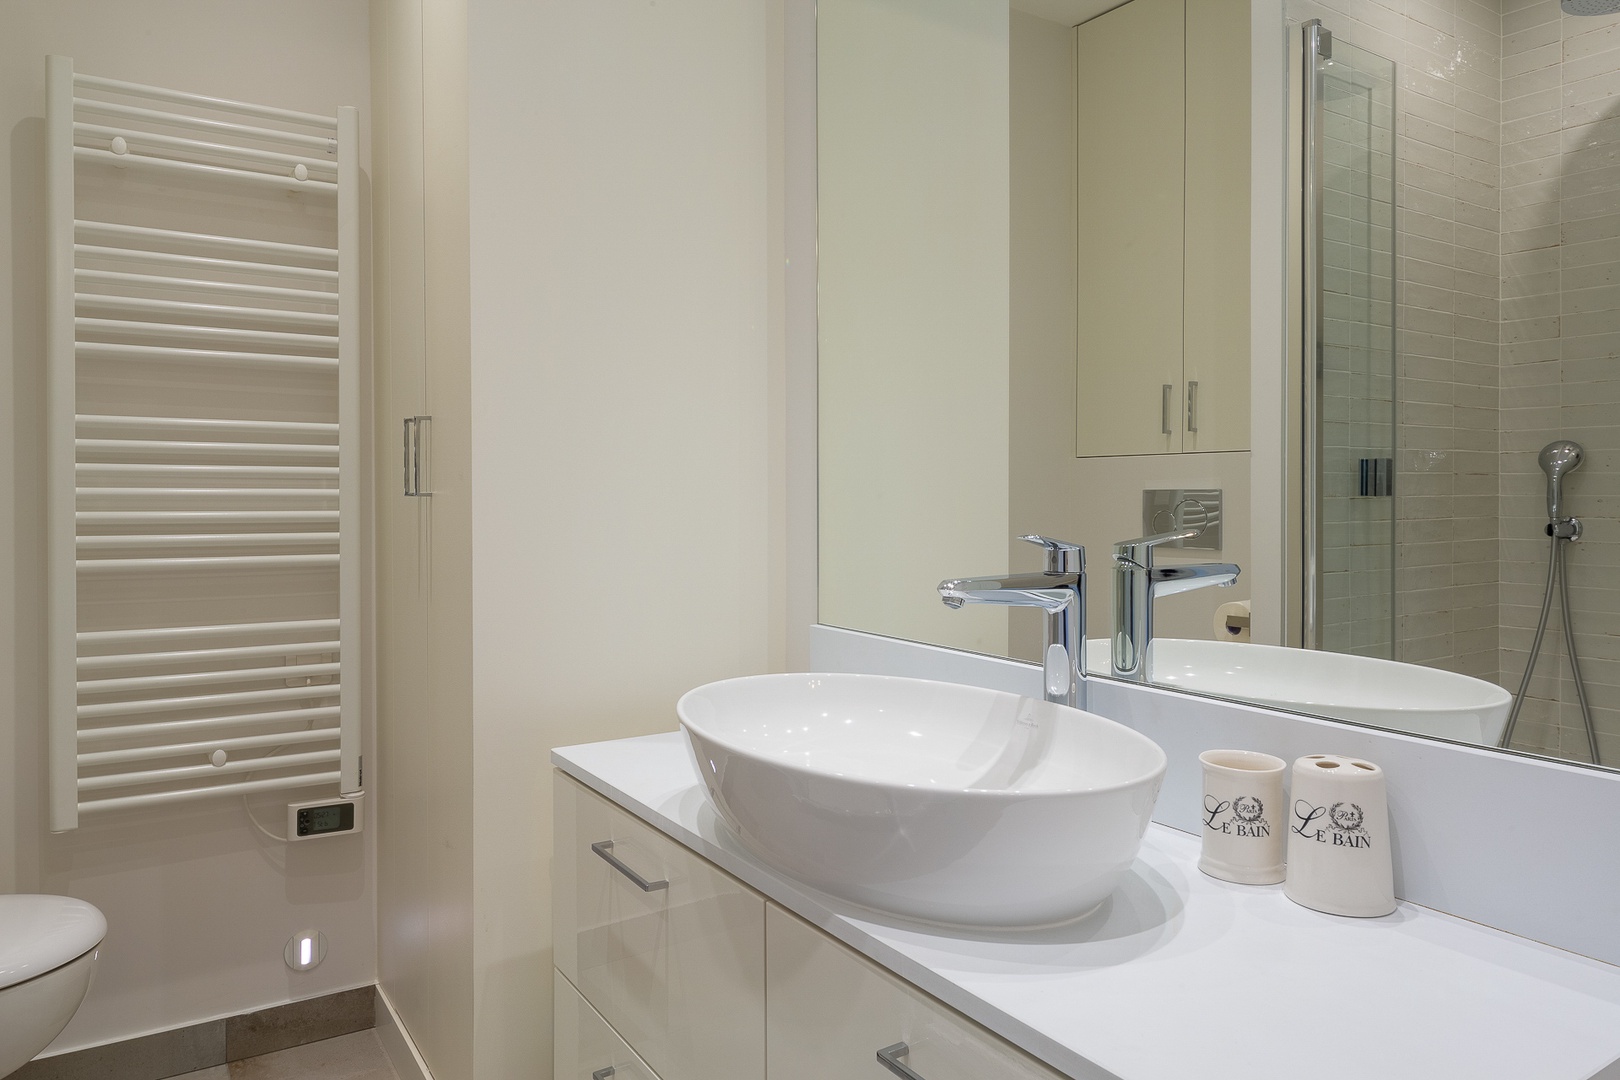 The en suite bathroom 1 comes with a shower, toilet, sink and storage.